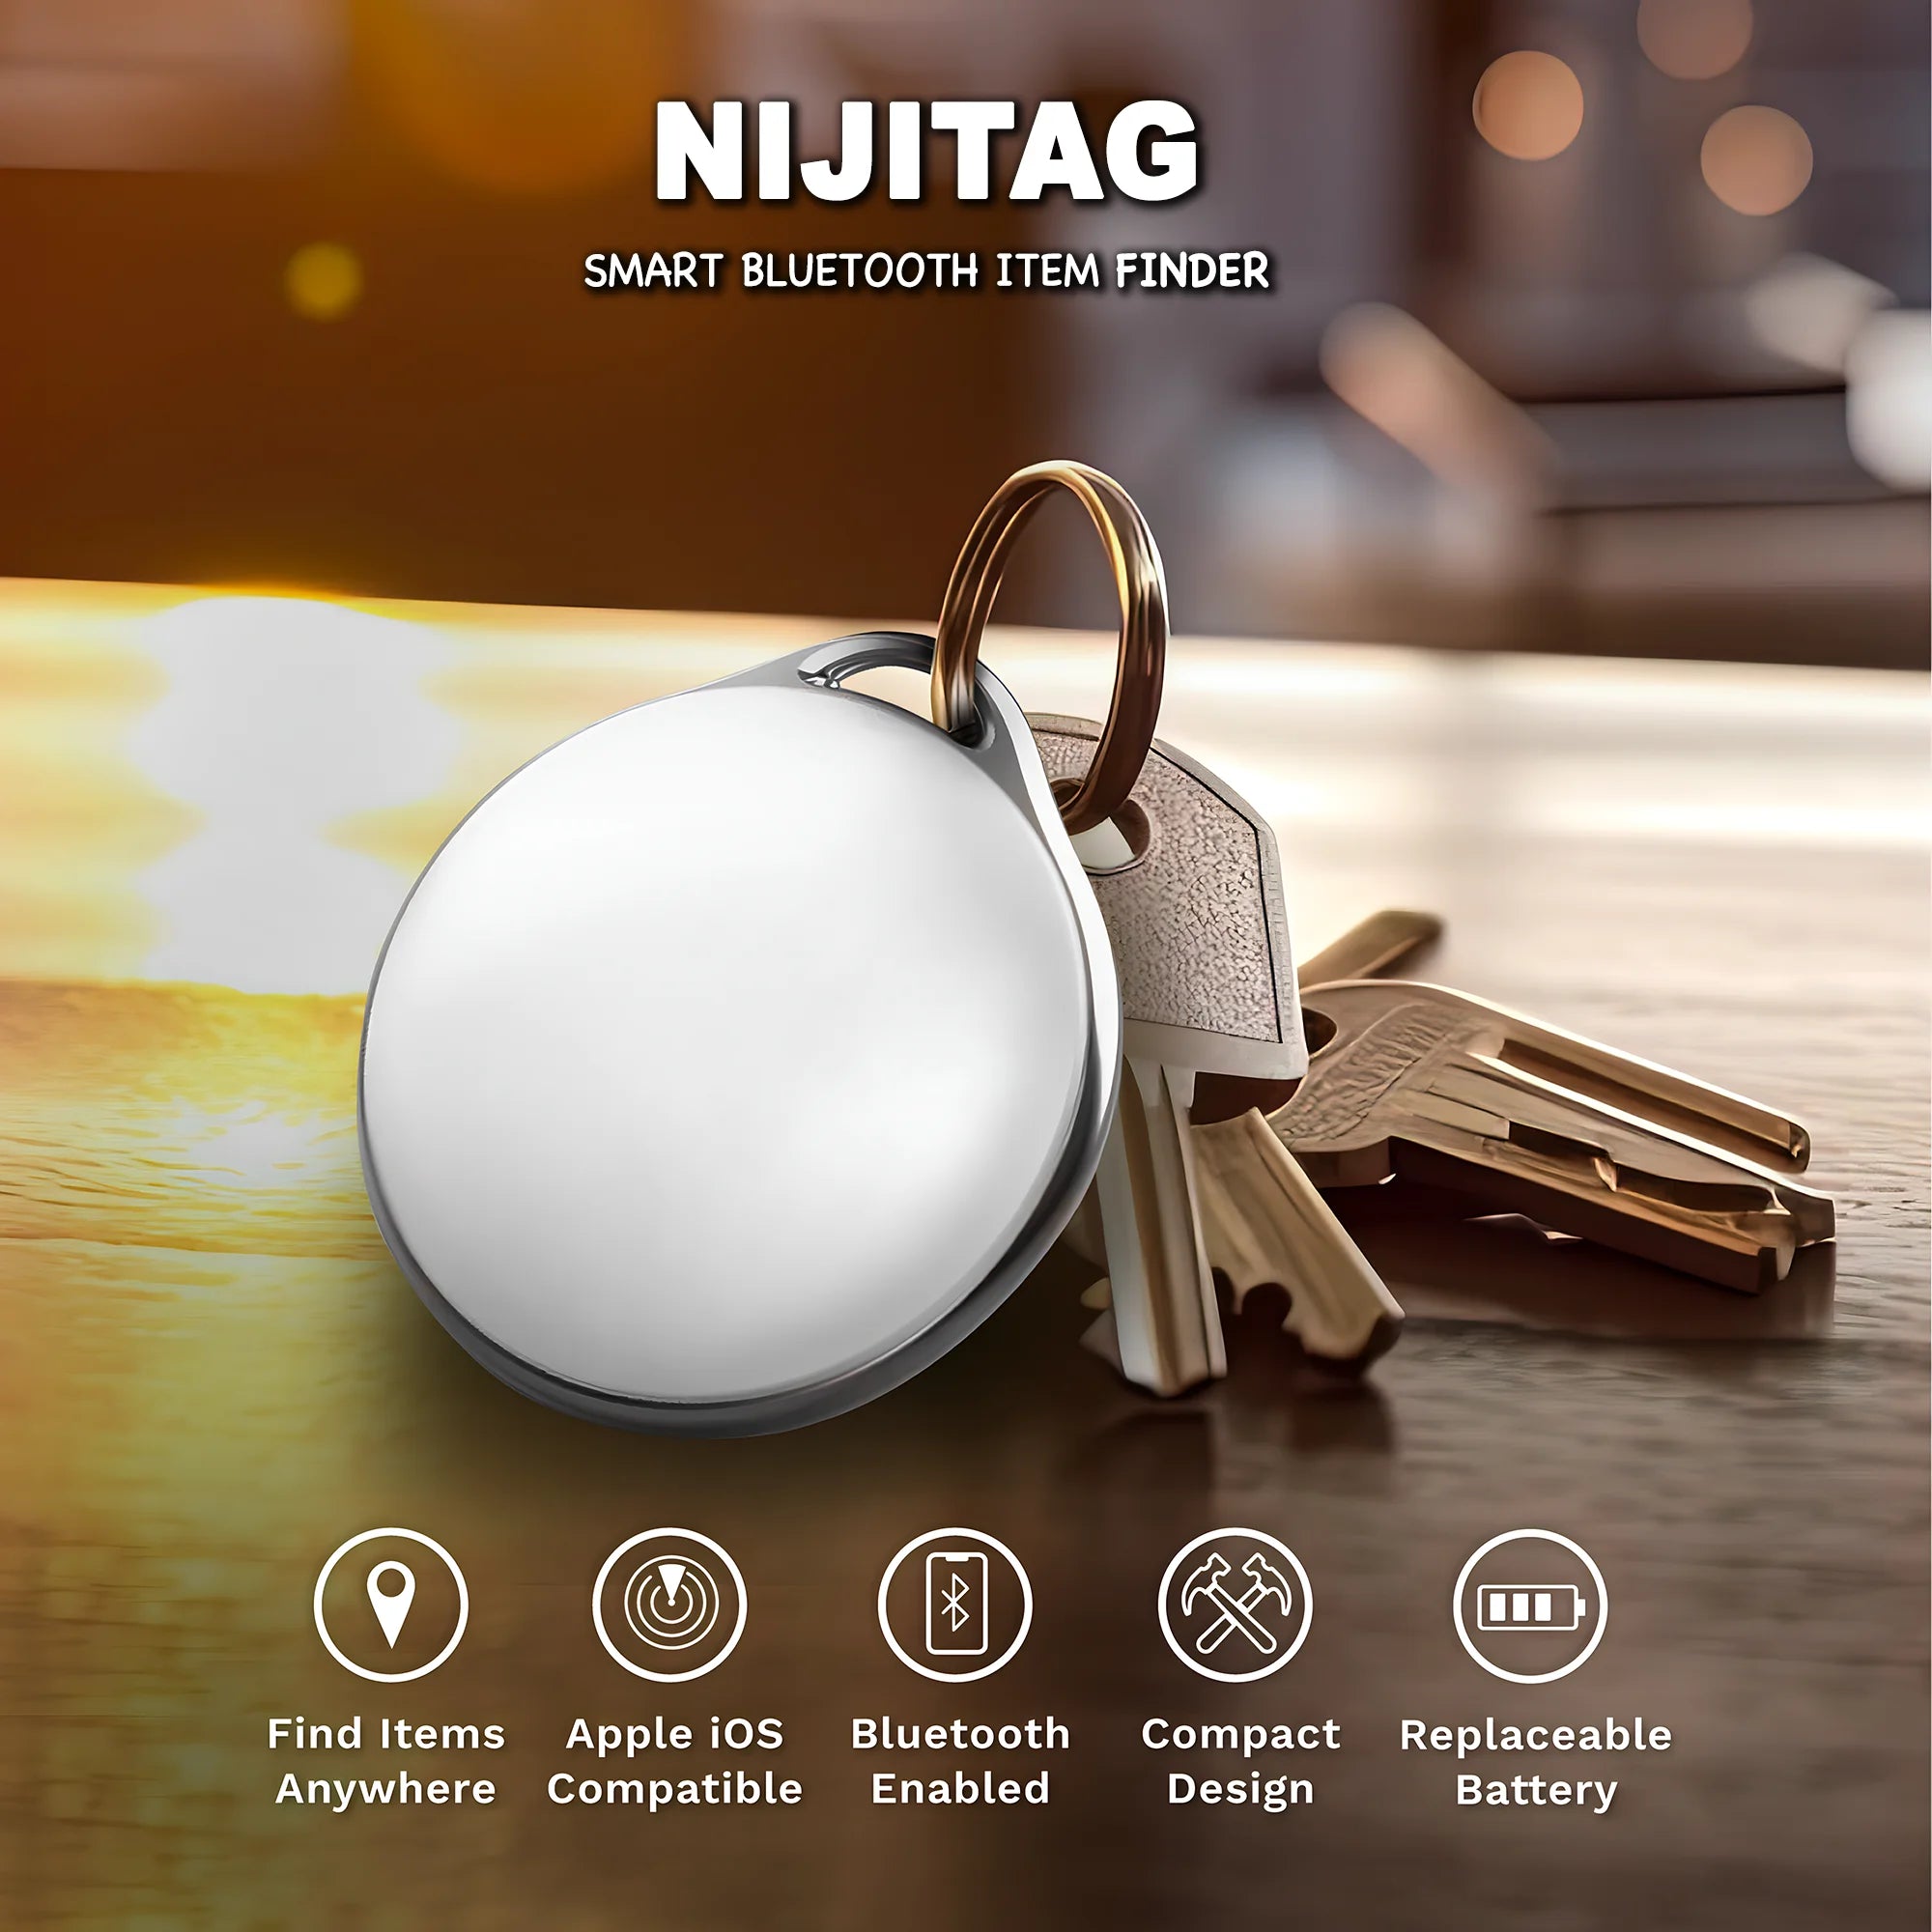 NIJITAG Smart Tag Bluetooth Key Tracker For Dogs, Cats, Cars, Wallet, Luggage, Item Finder with Unlimited Range Tracking within Apple’s Find My app - iOS devices only (Pearl White/Charcoal Gray))